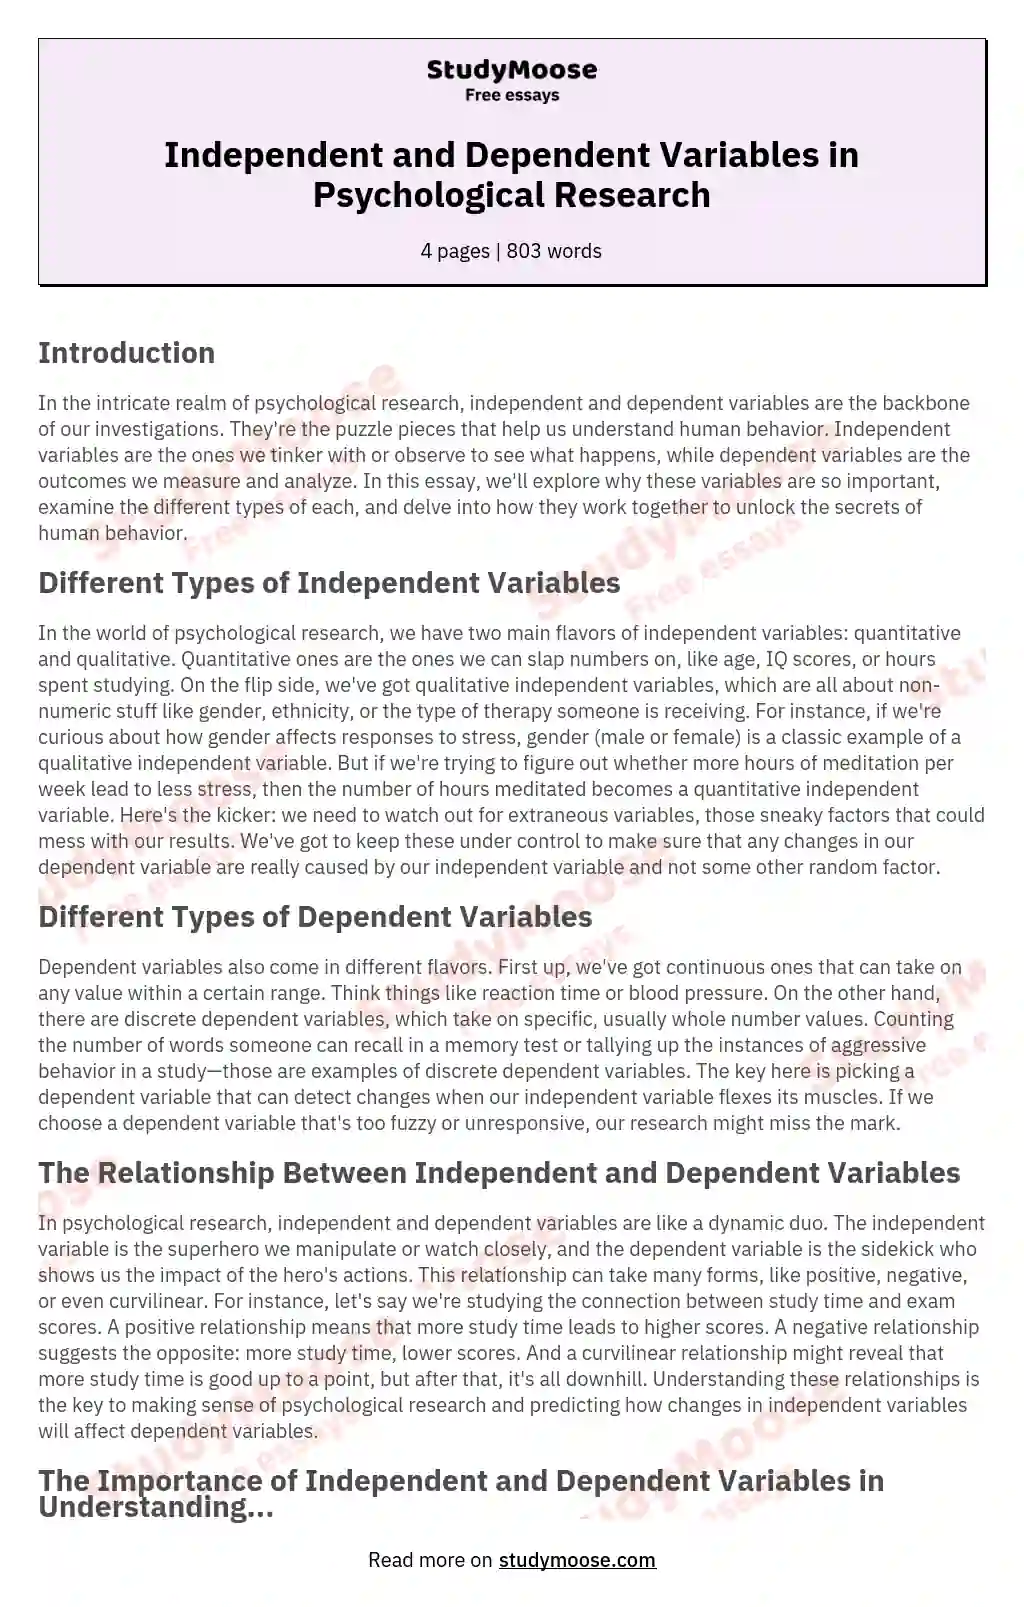 Independent and Dependent Variables in Psychological Research essay